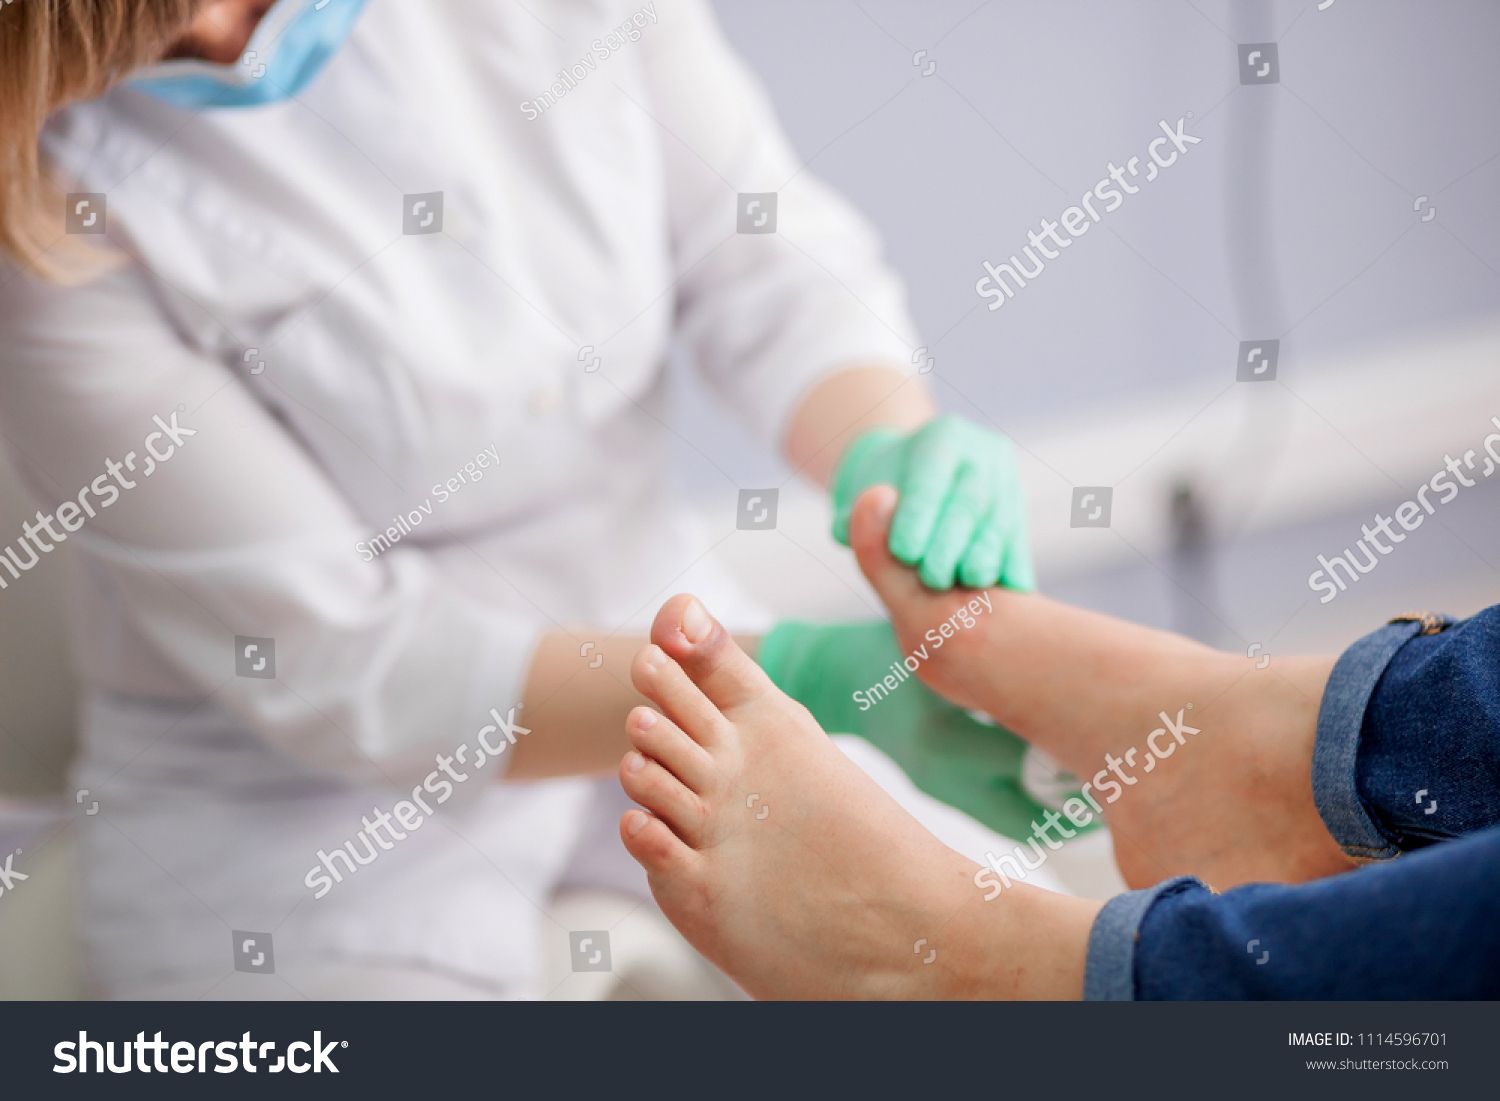 doctor, the podiatrist examines the foot #1114596701